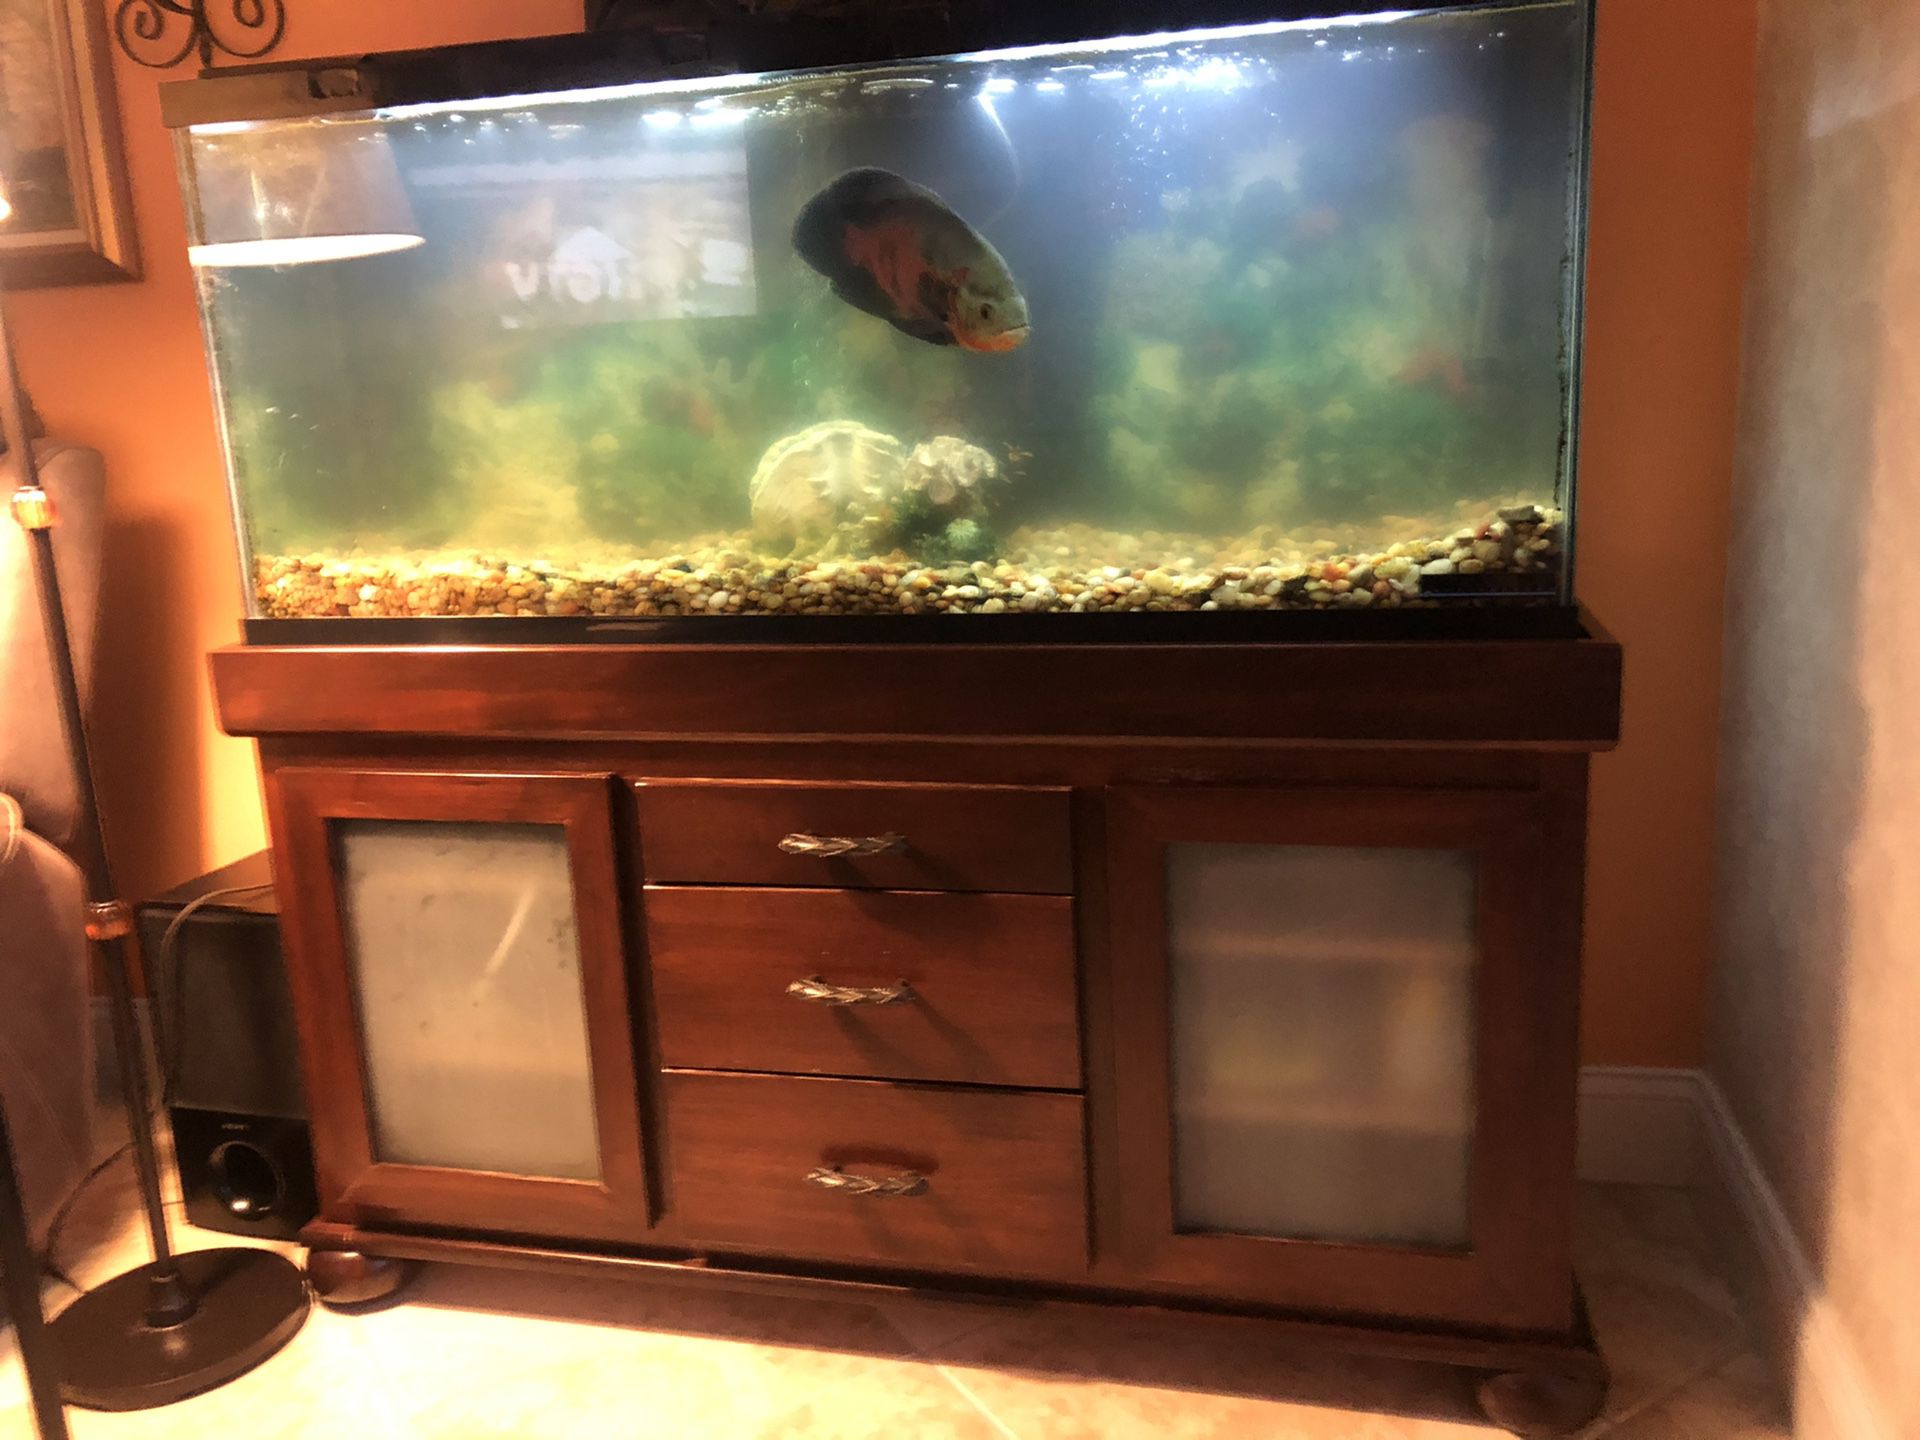 55 gallon fish tank and stand(fish included) $275 OBO